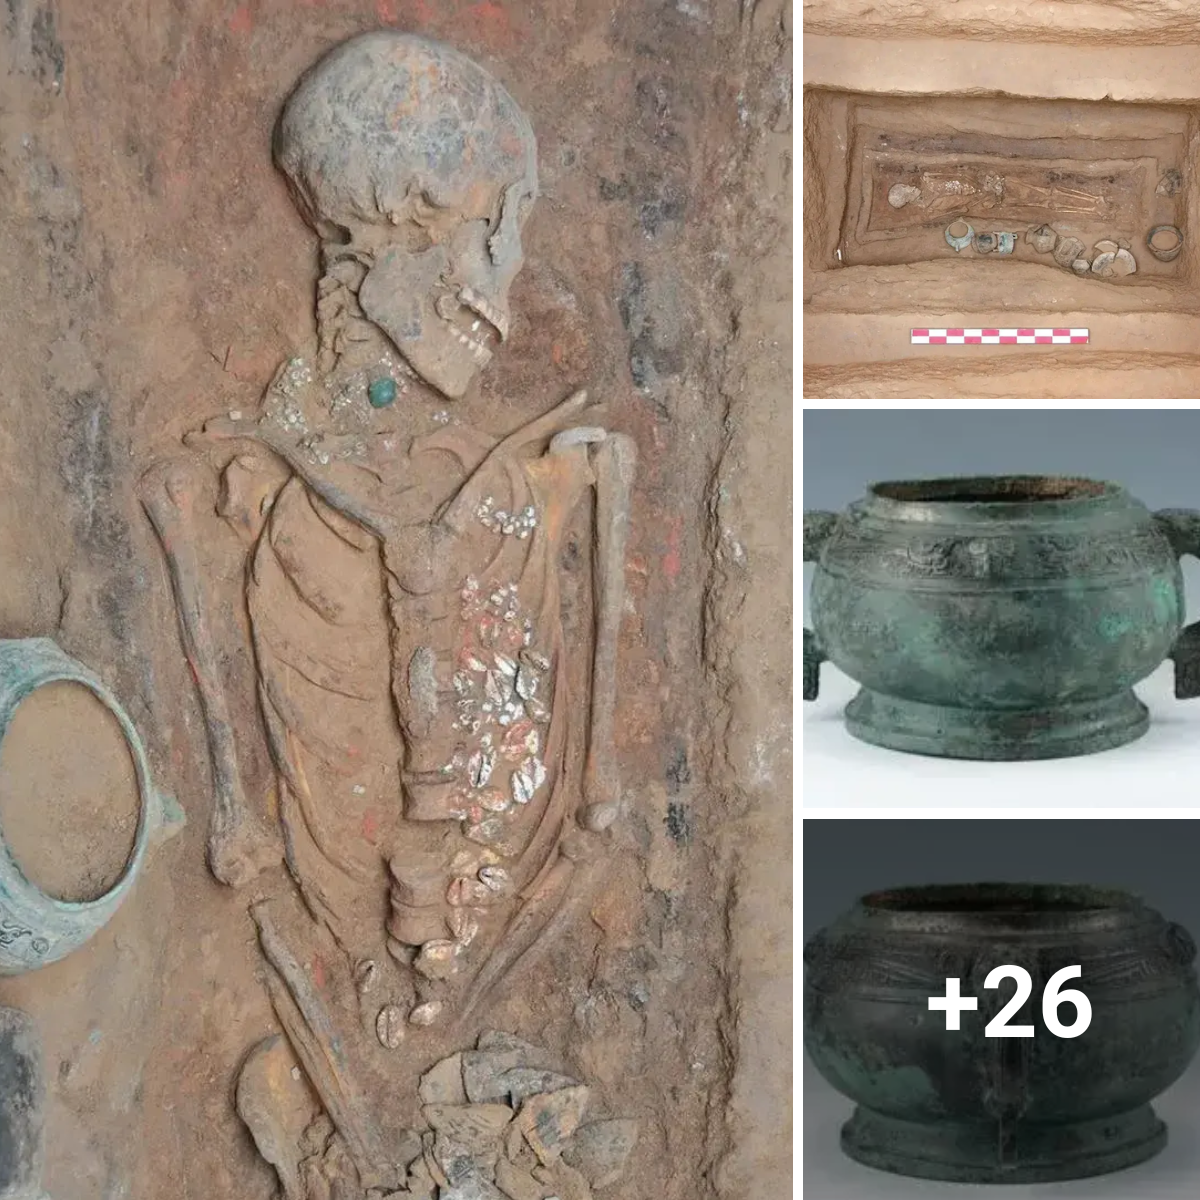 When archaeologists excavated the tomb of a 3,000-year-old noblewoman in China, they uncovered some shocking mysteries.